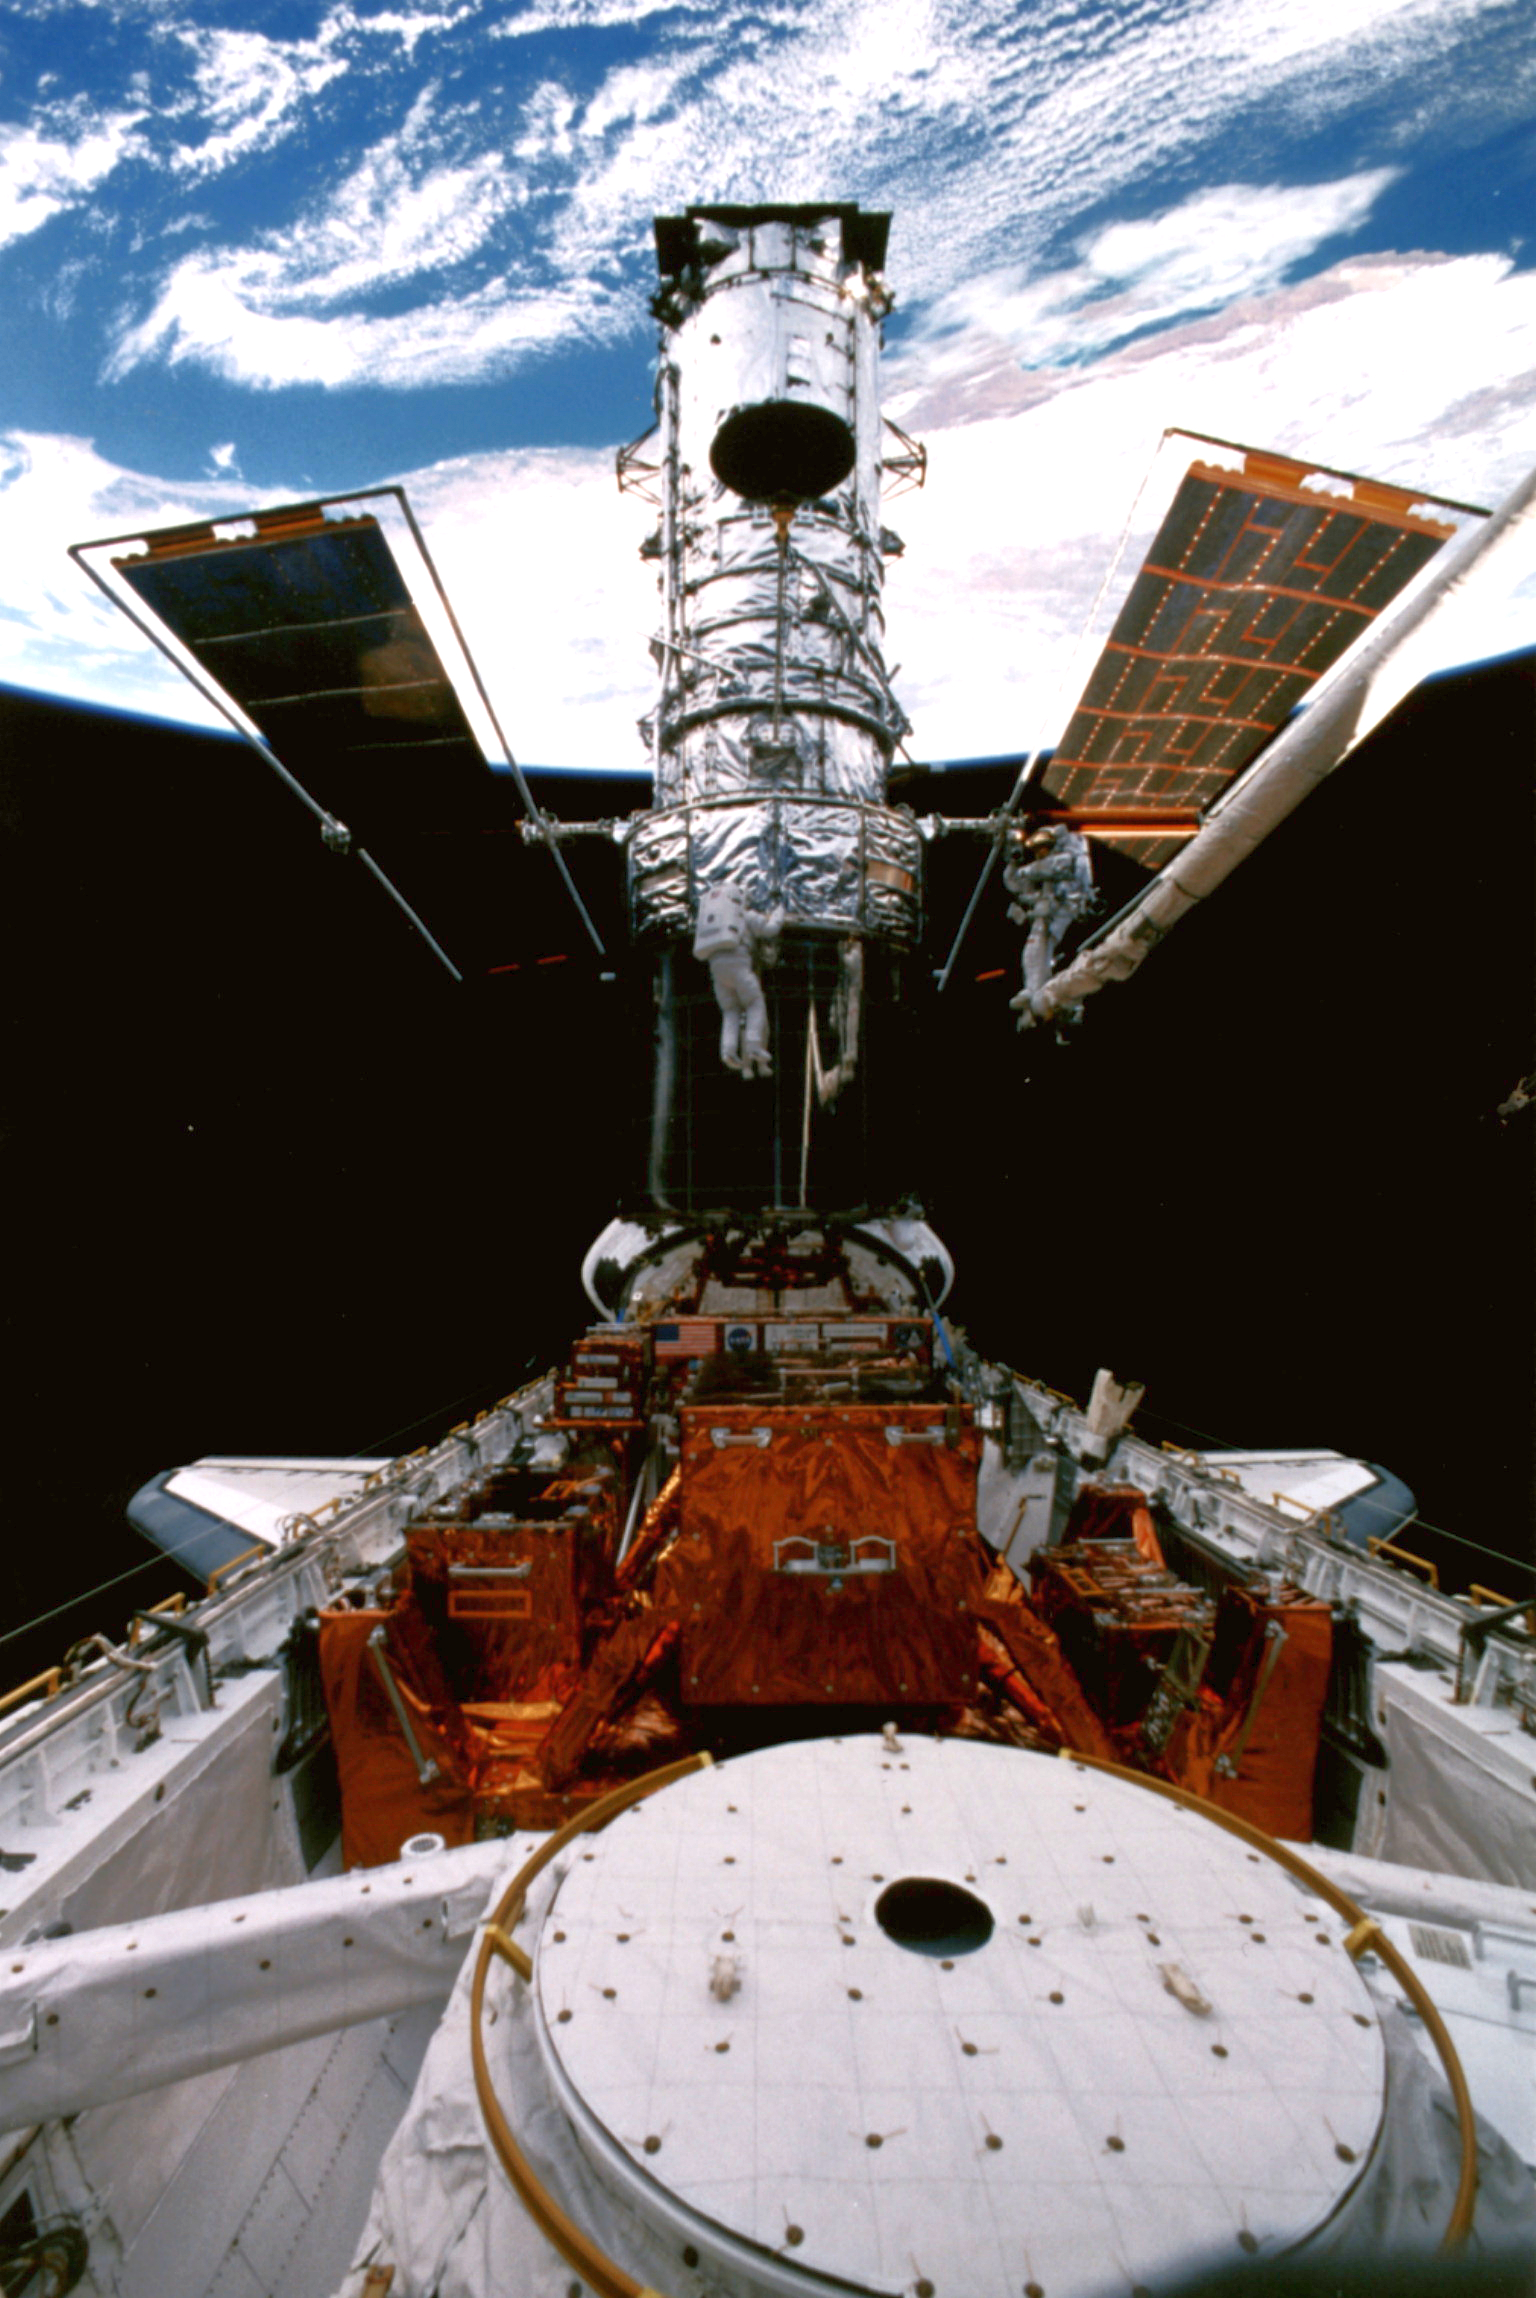 The Hubble Space Telescope docked in the cargo bay of the shuttle with astronauts working on it. A portion of the blue earth can be seen behind it.